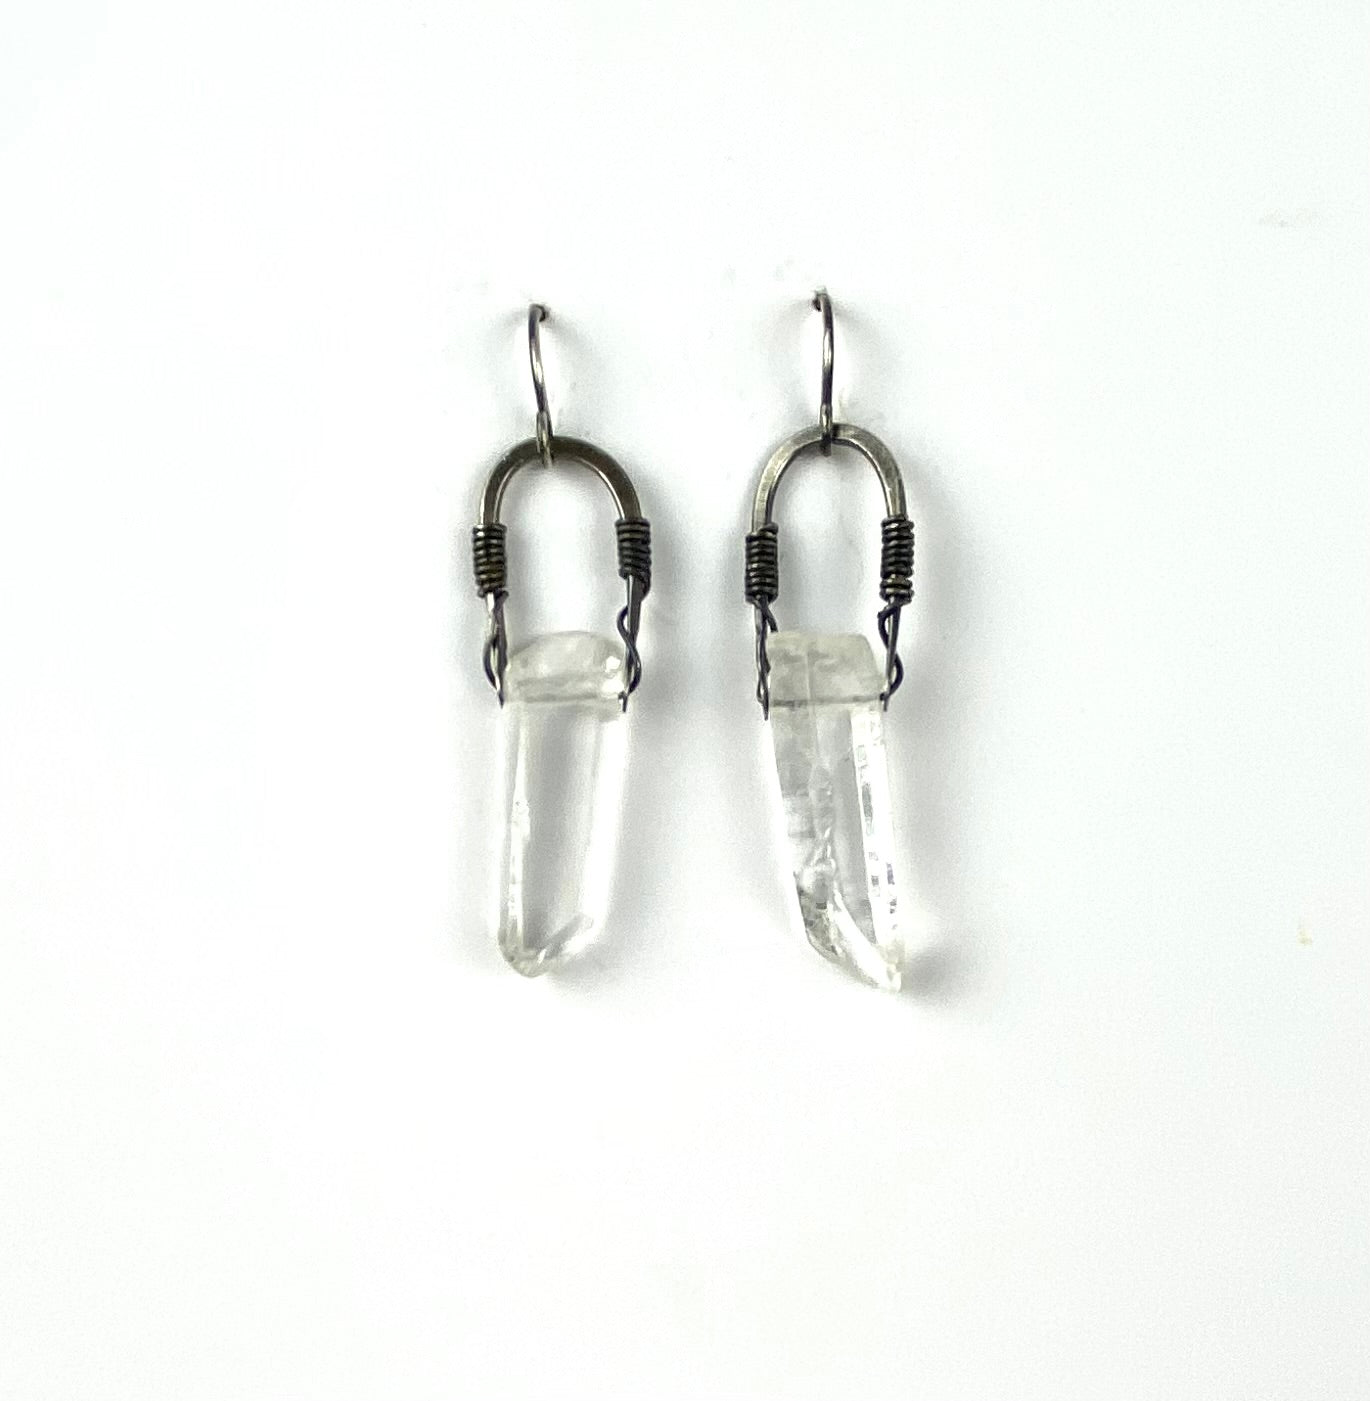 Crystal gemstone silver stirrup with patina fashion earring jewelry